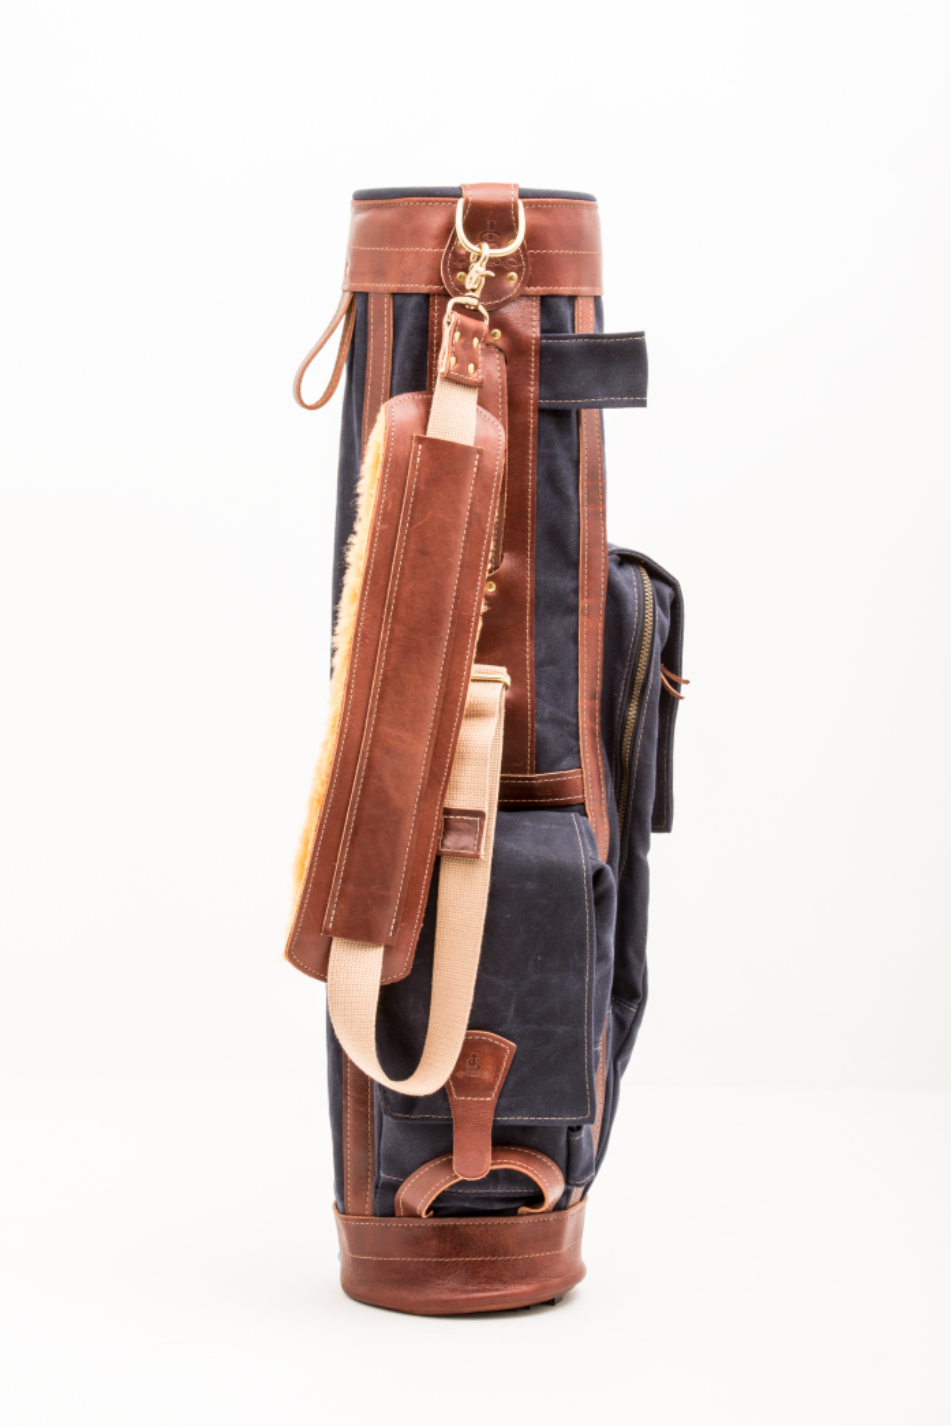 Airliner Style Golf Bag - Steurer & Jacoby